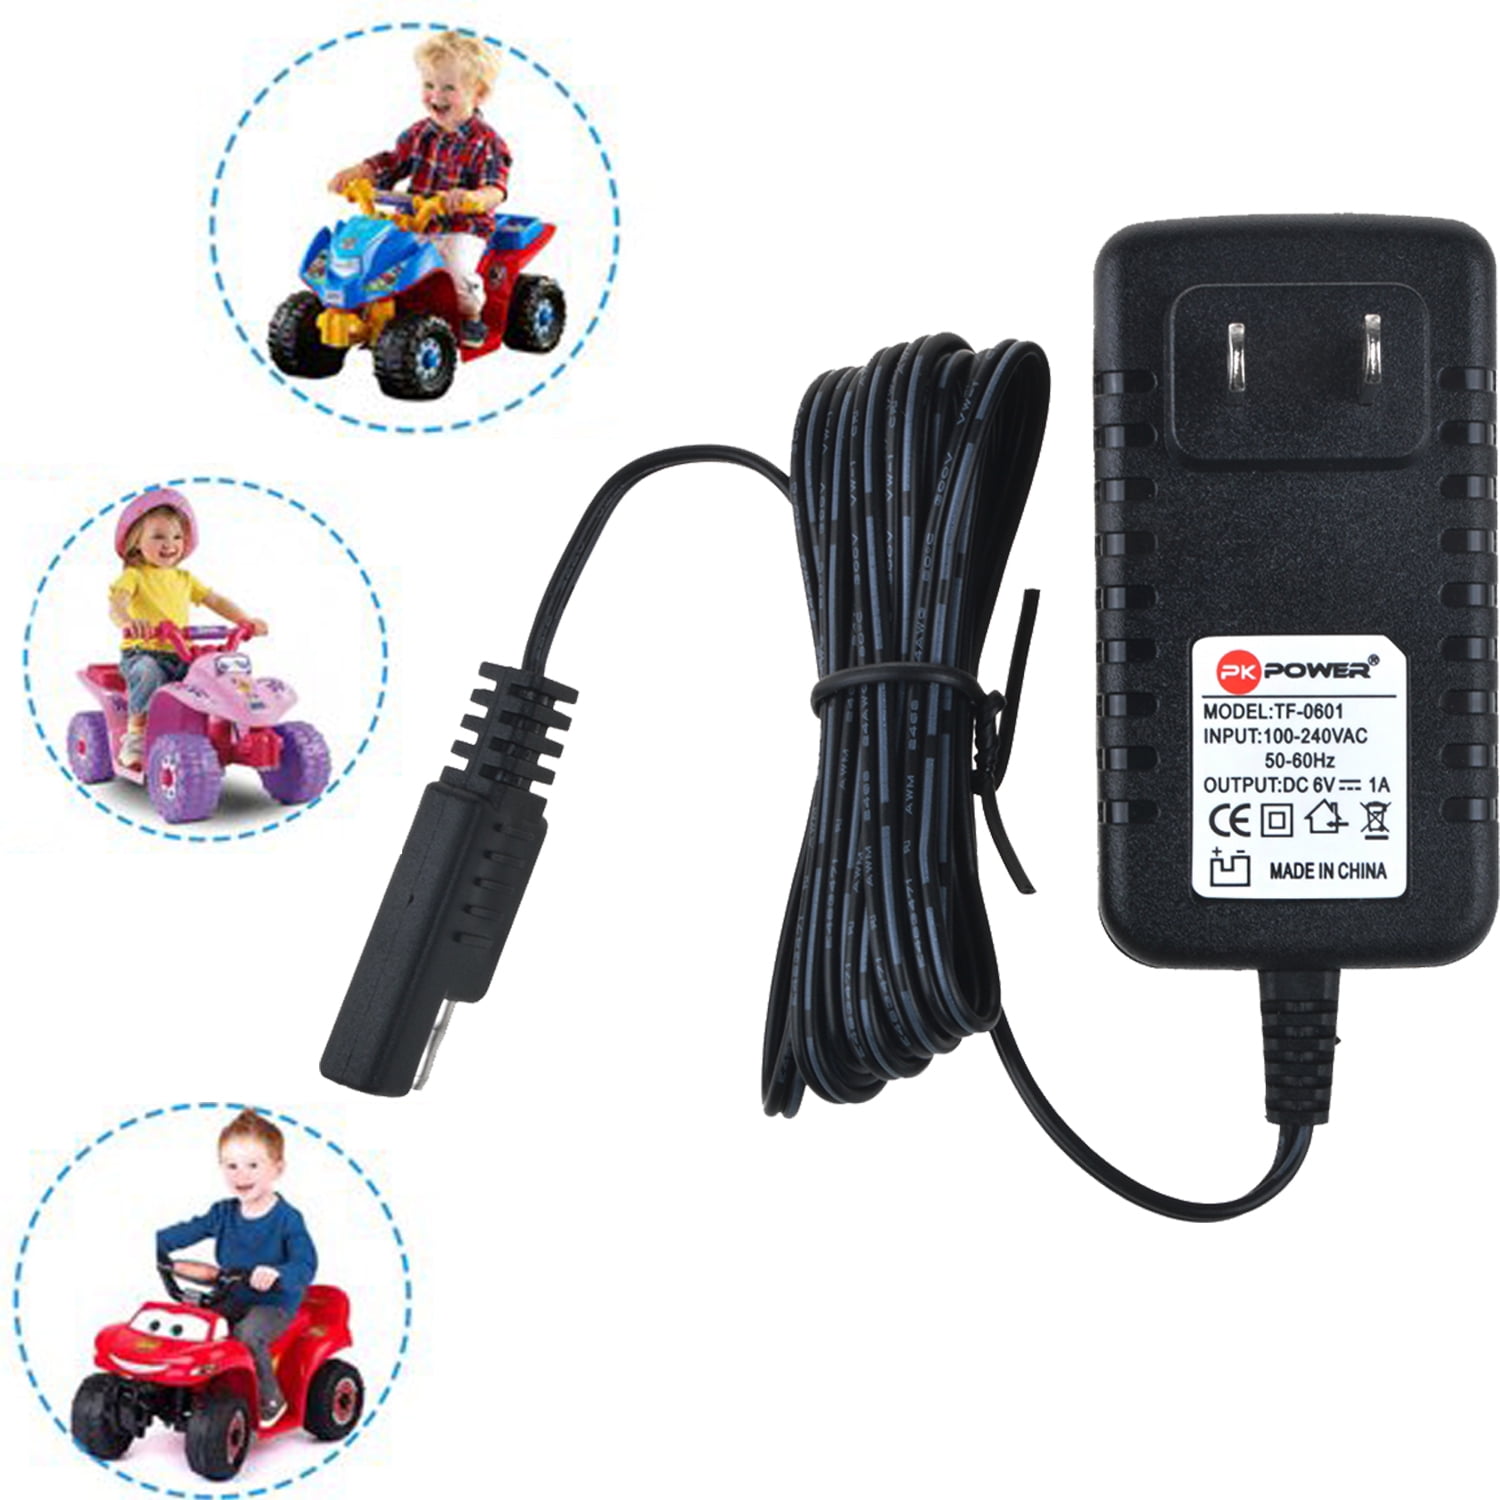 NEW! 12 Volt Battery Charger for Kid Trax Battery Powered Ride-On Toys Large 